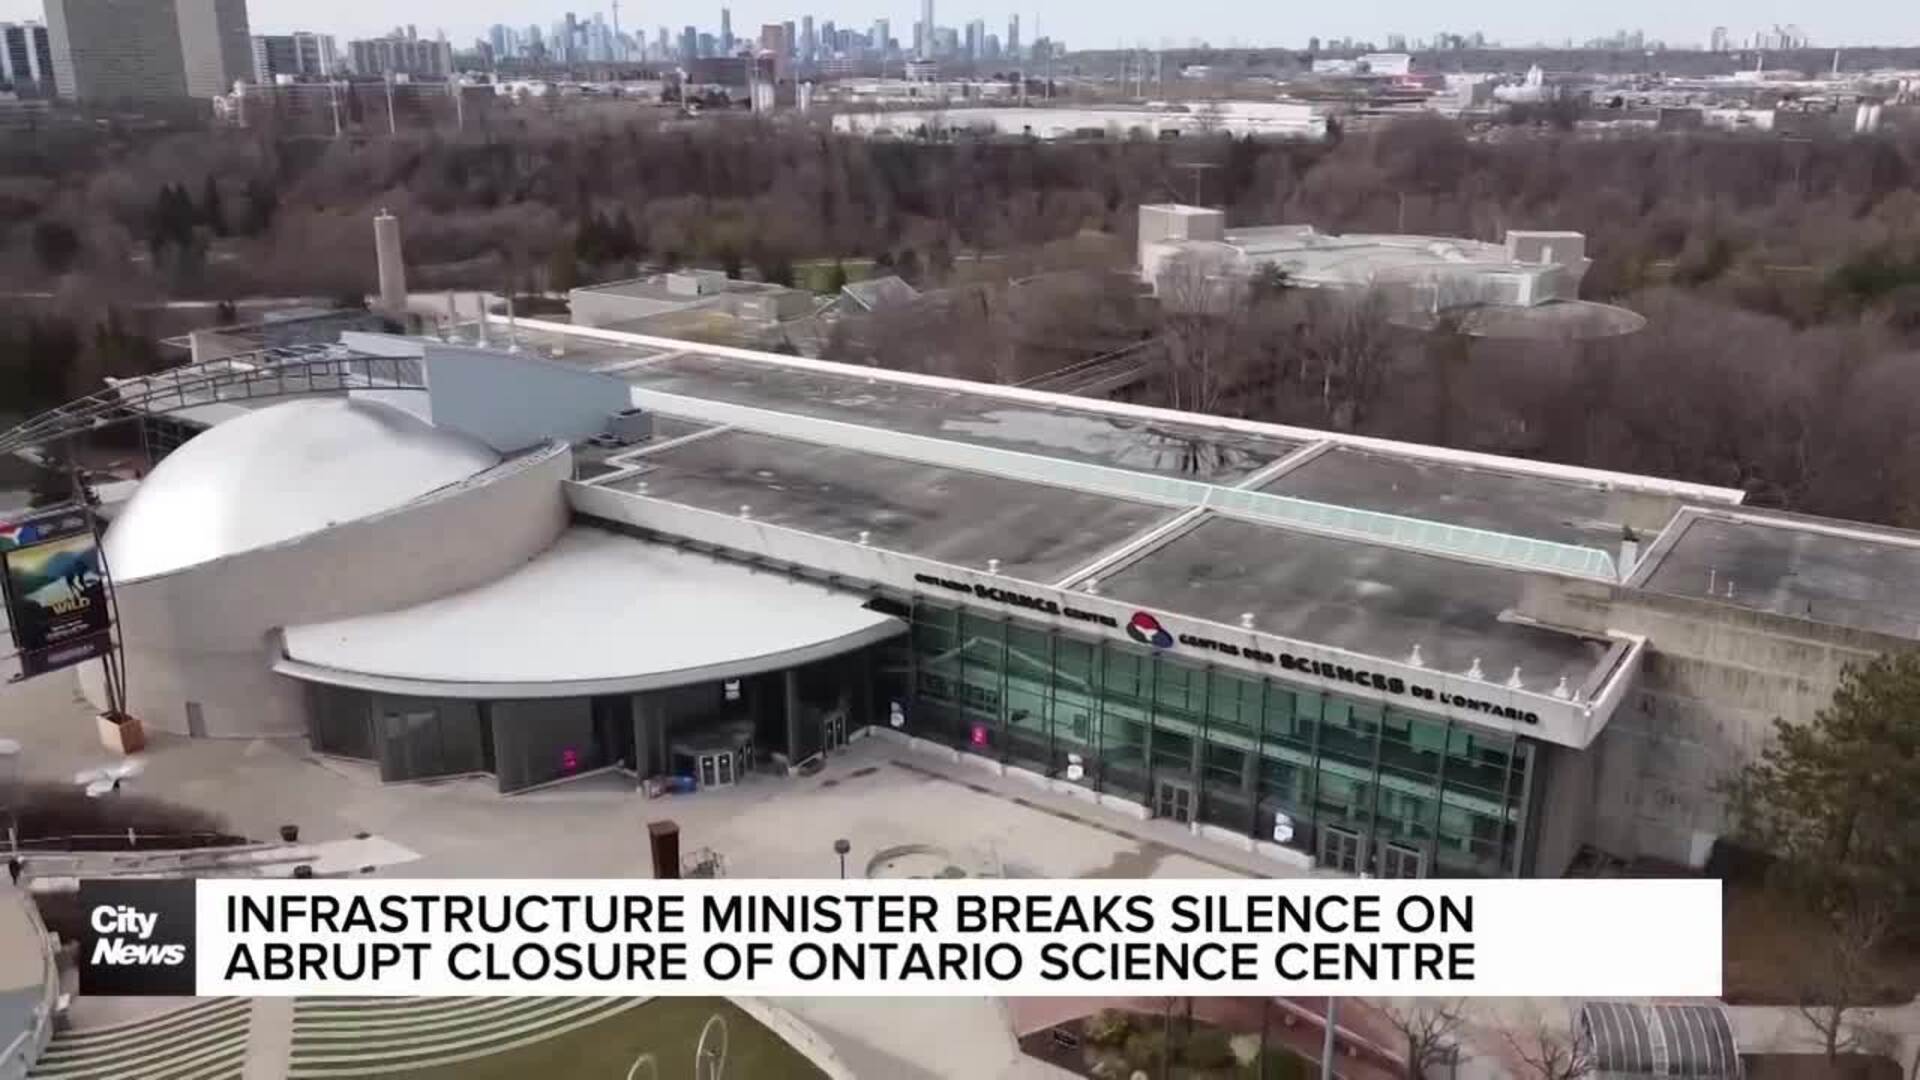 Infrastructure minister breaks silence on Science Centre closure